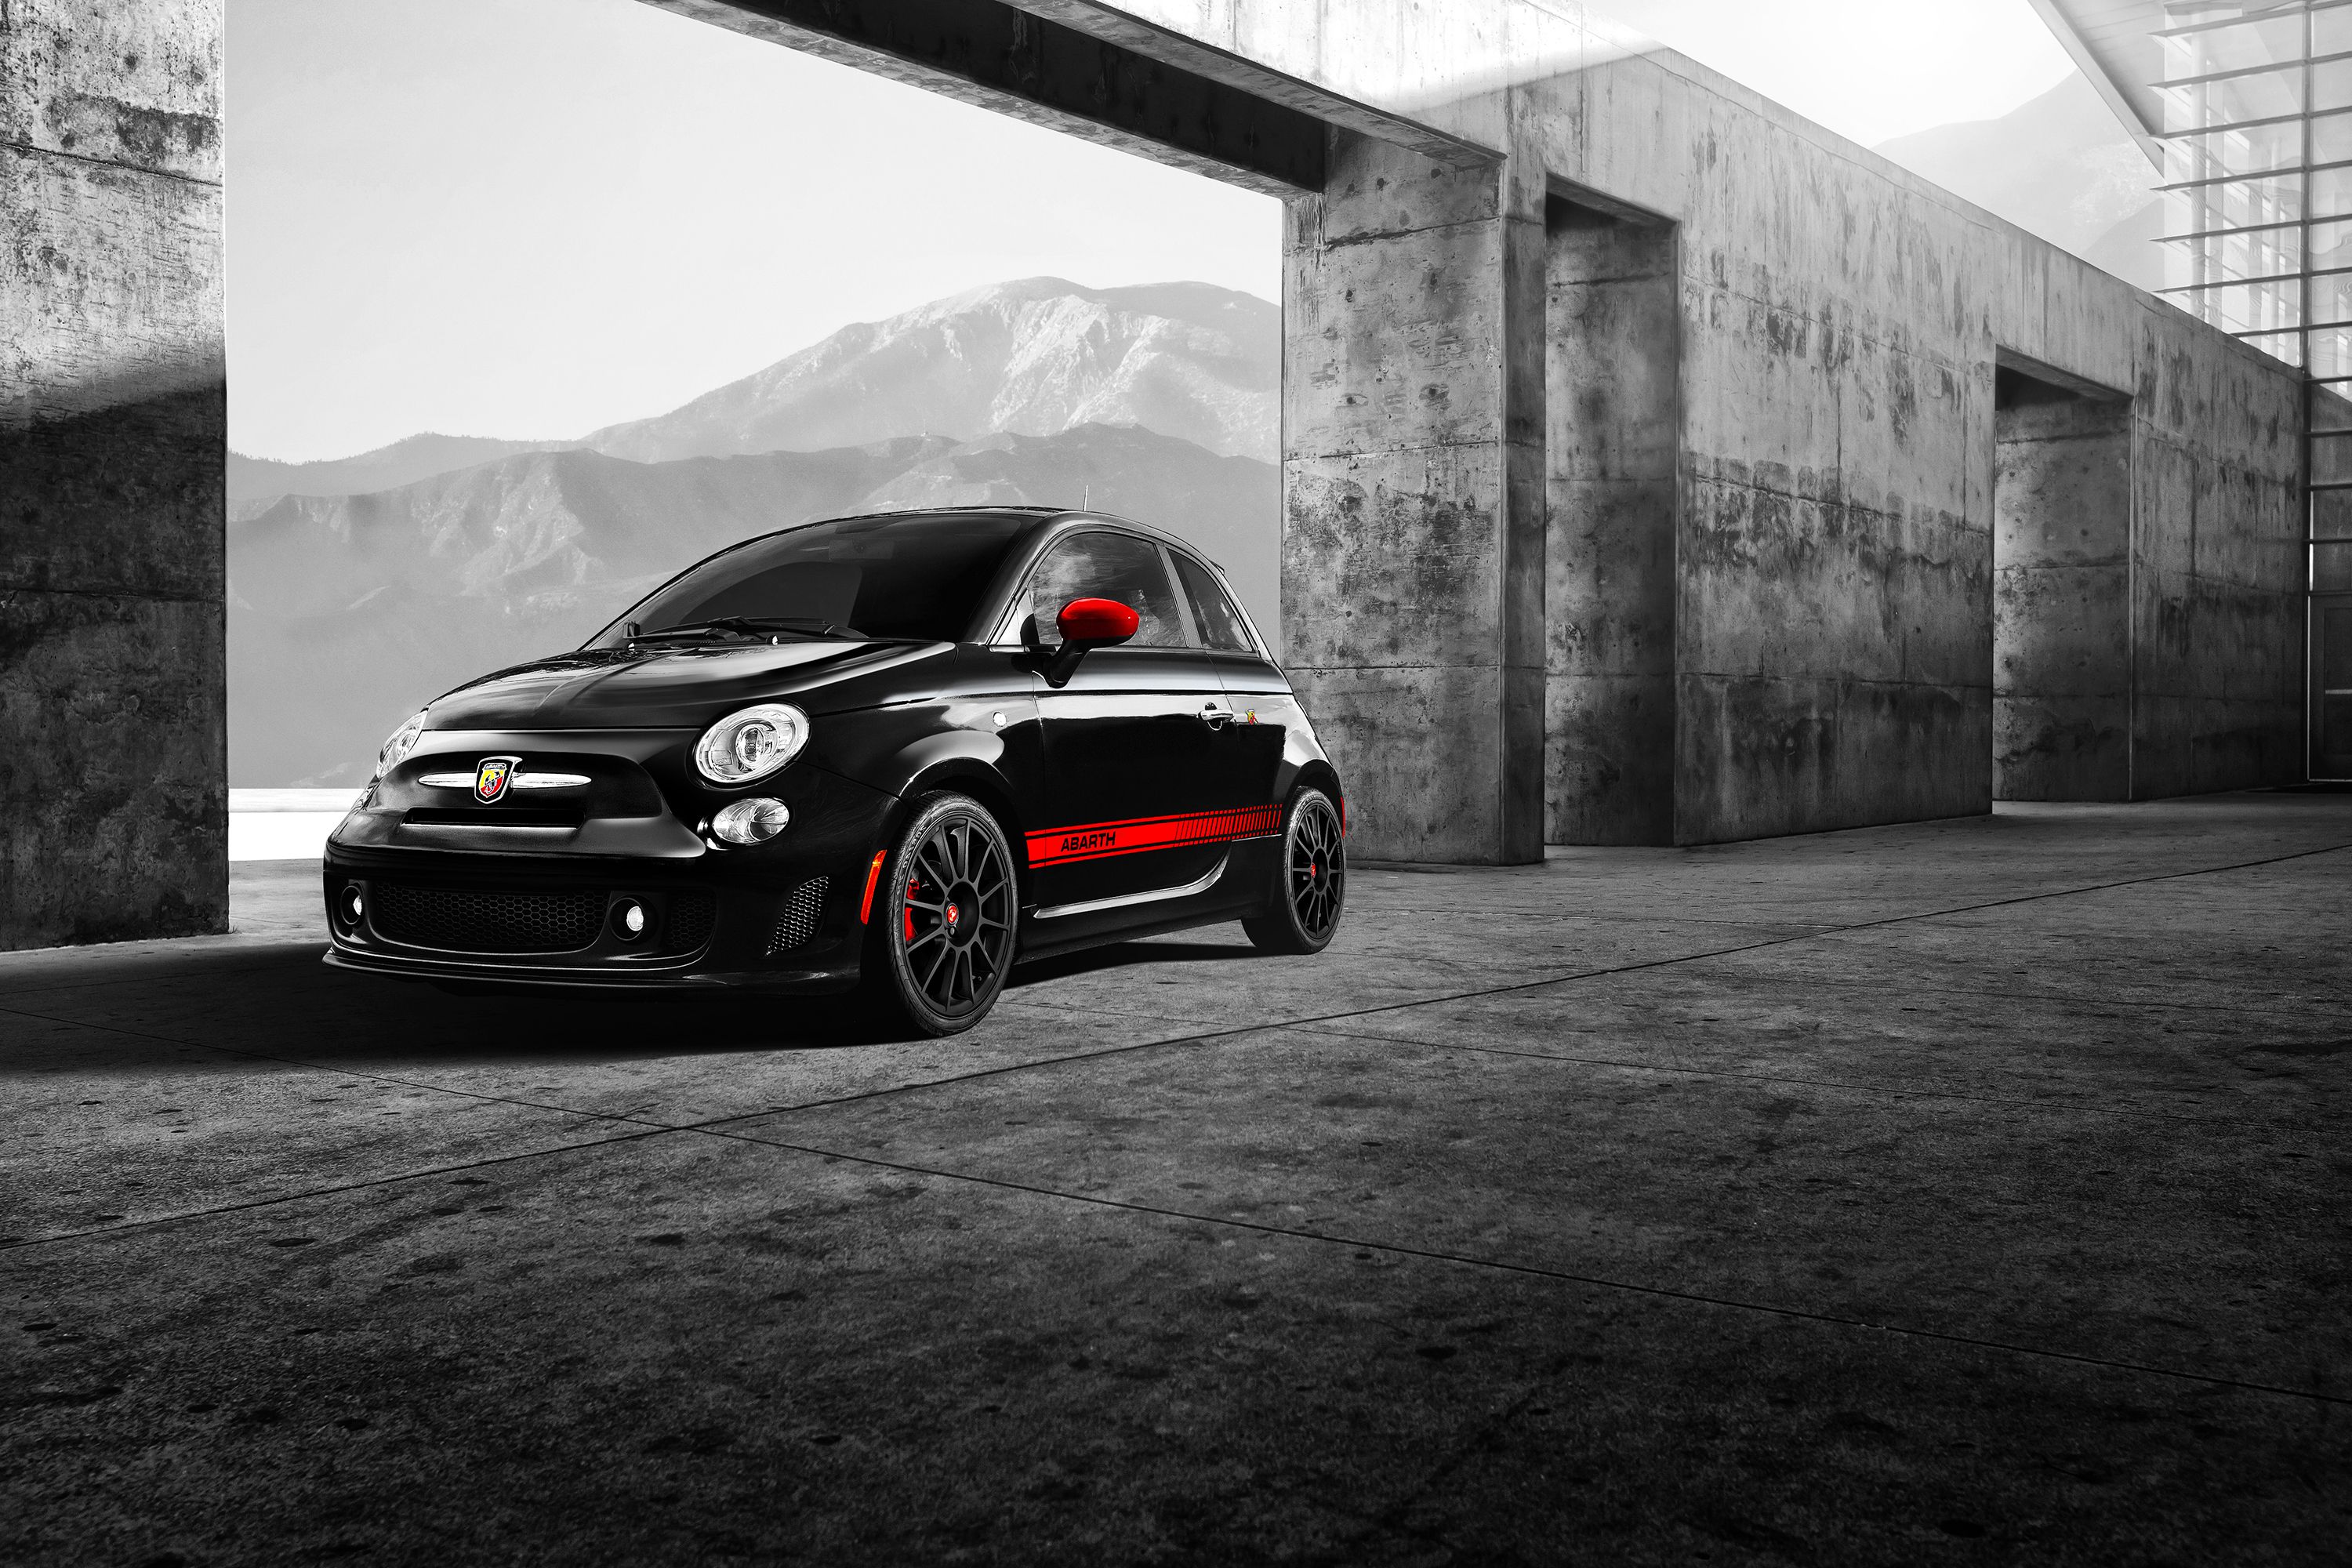 Fiat Cars: Reviews, Pricing, and Specs